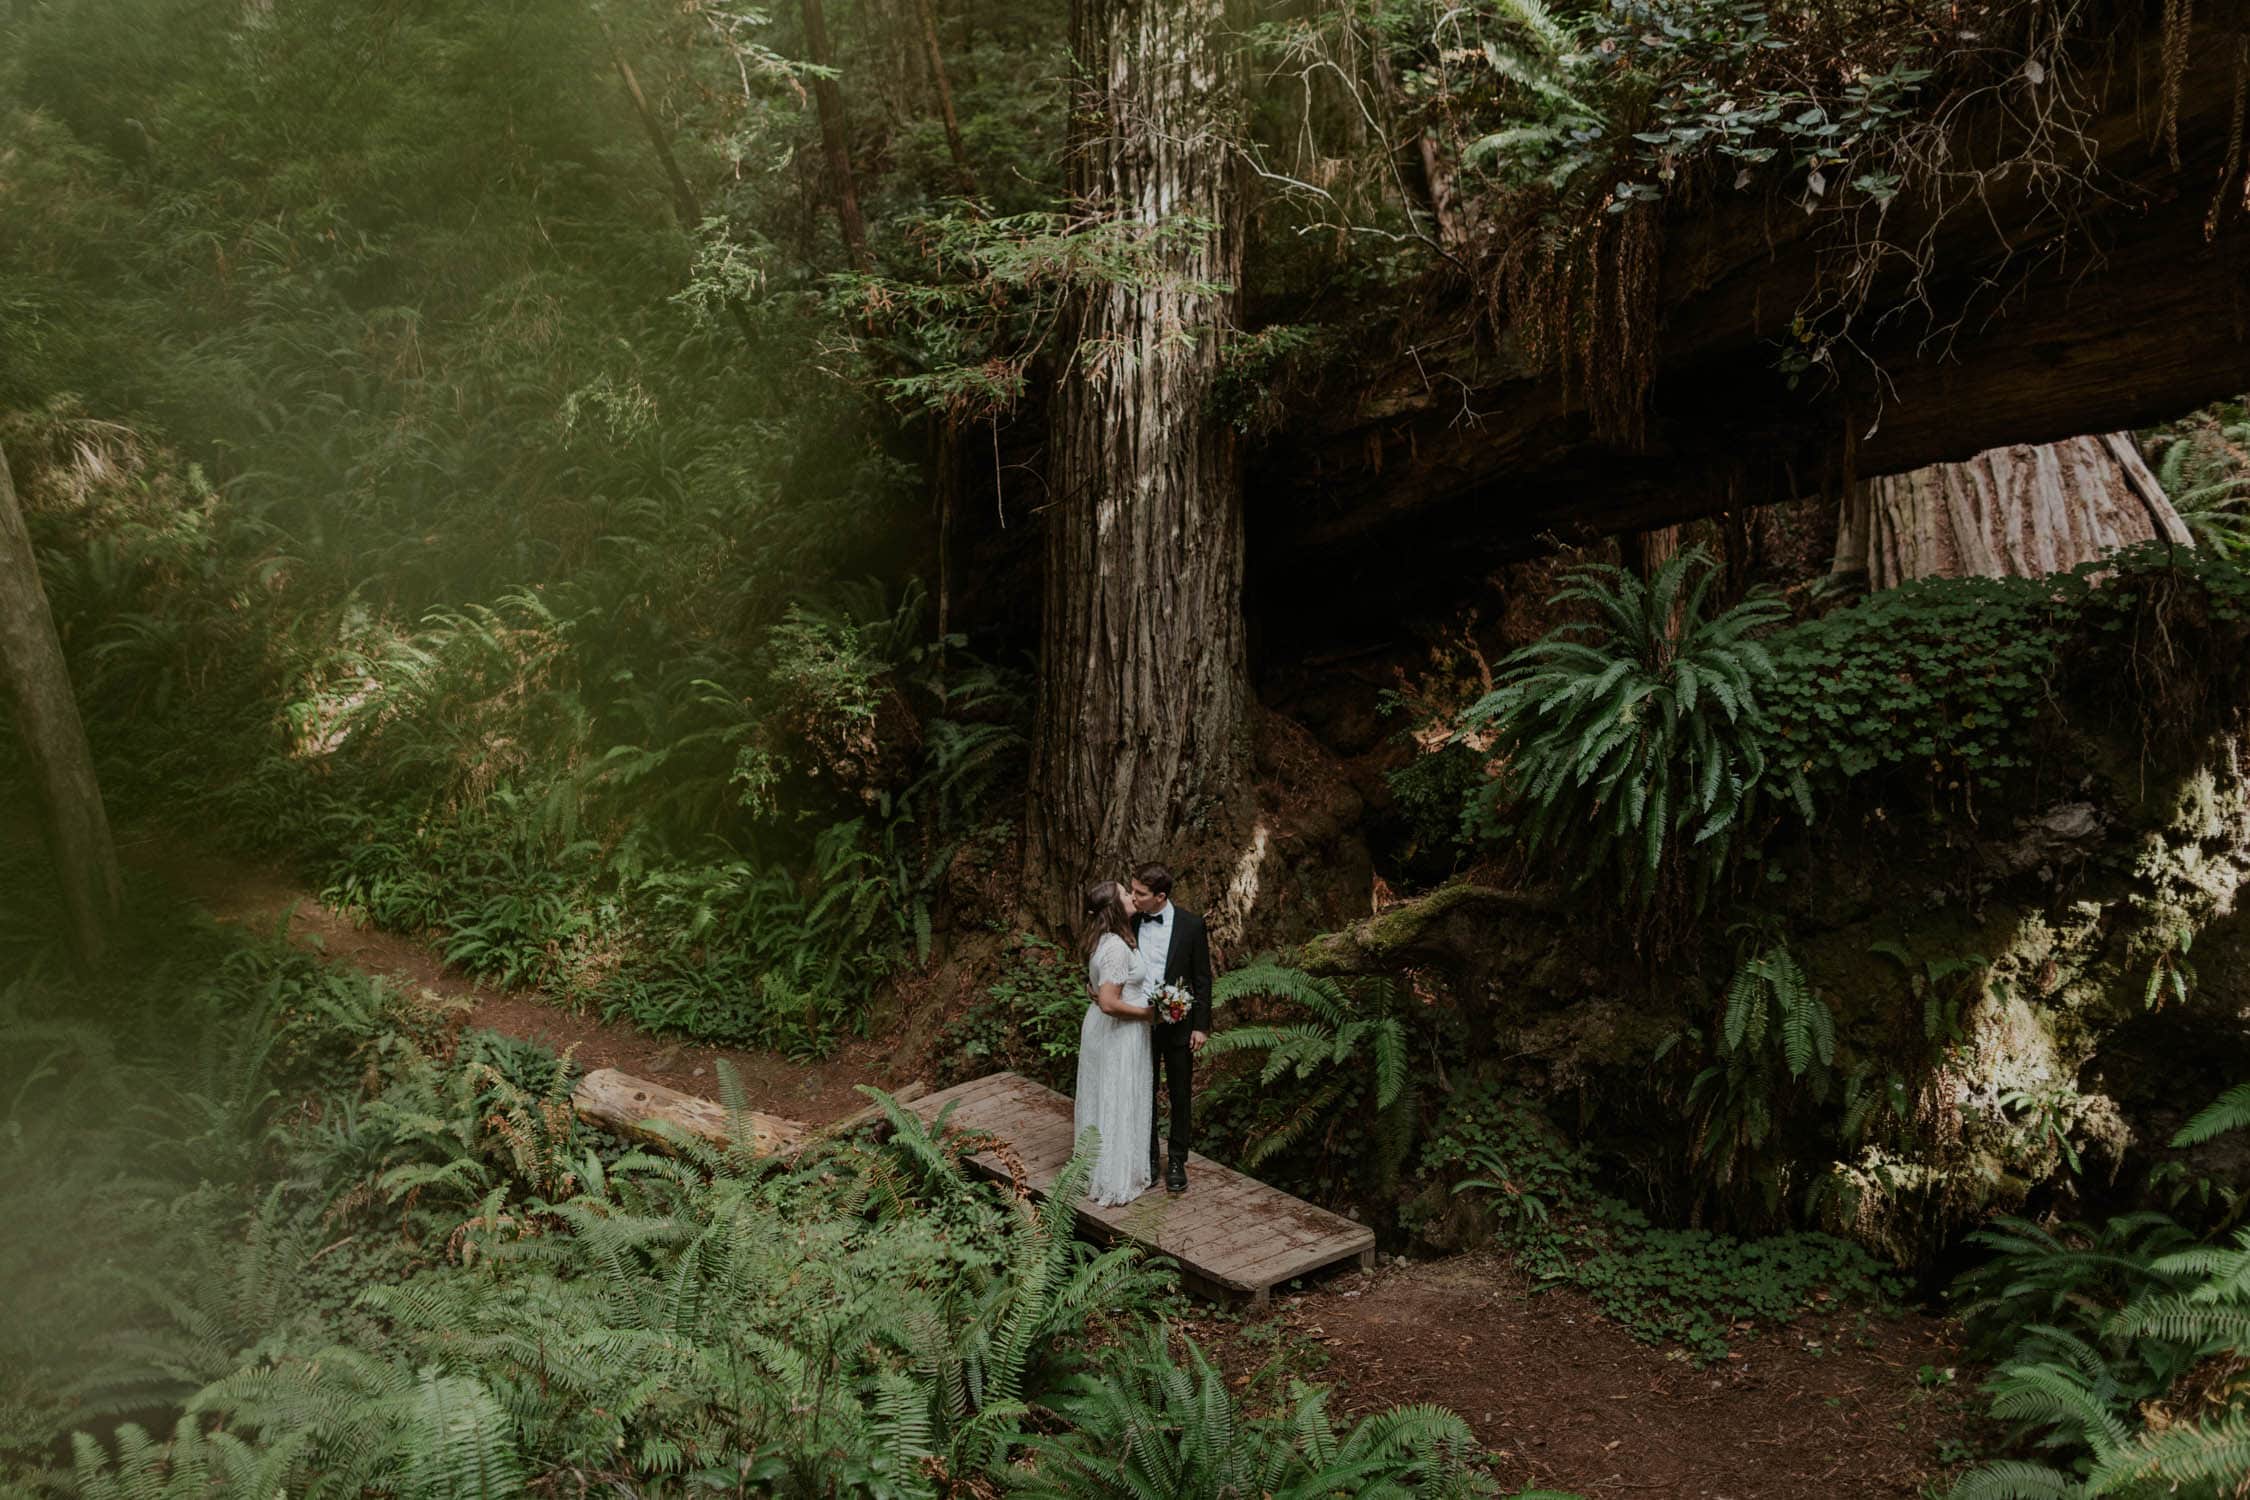 A couple in wedding attire kissing on a bridge in Redwood National Park.